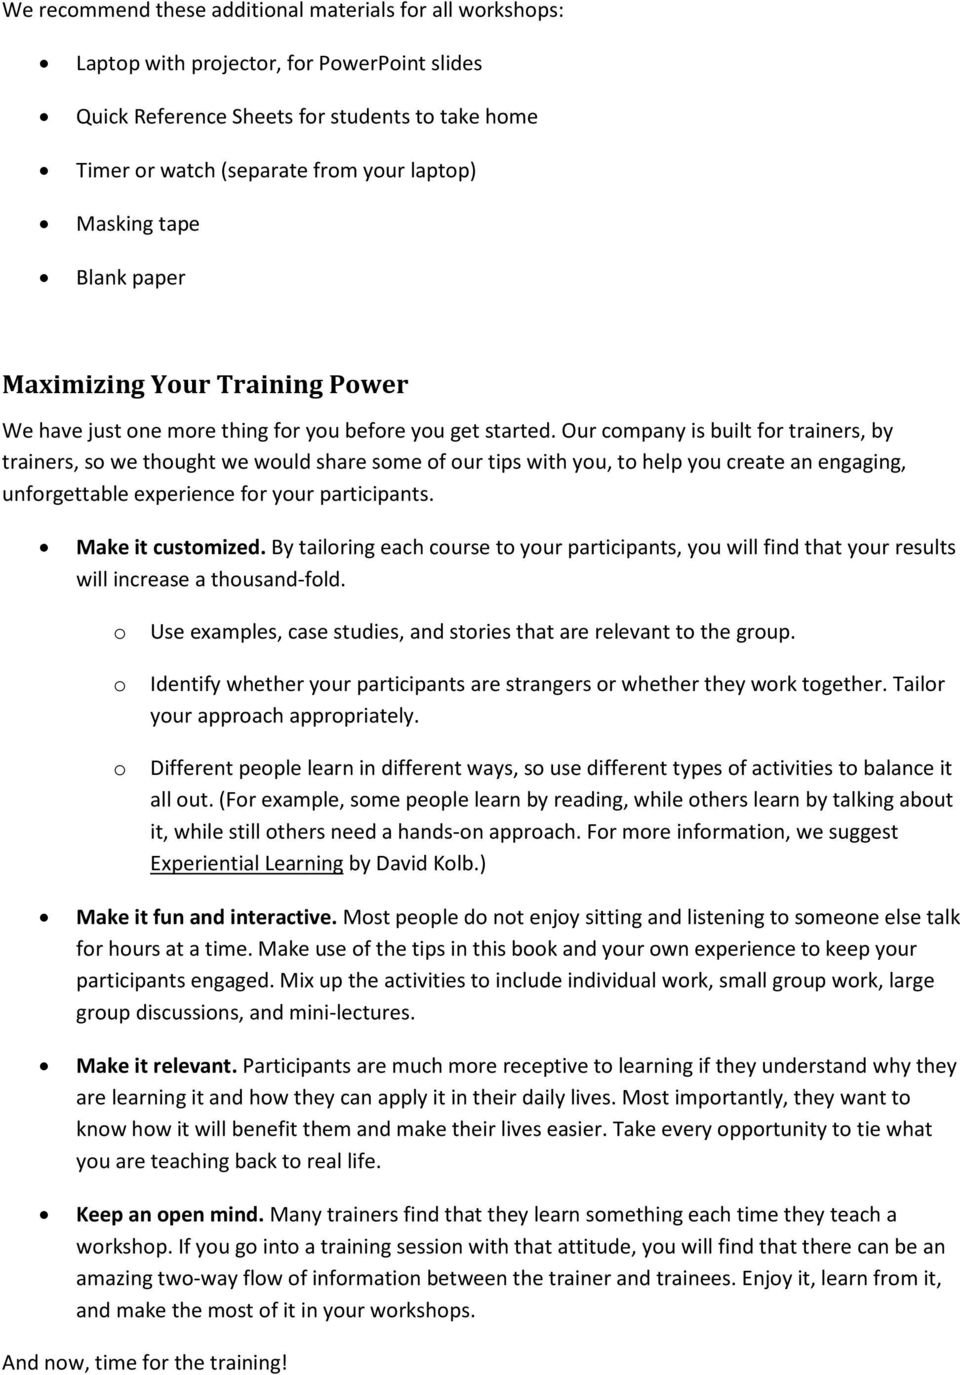 Our company is built for trainers, by trainers, so we thought we would share some of our tips with you, to help you create an engaging, unforgettable experience for your participants.